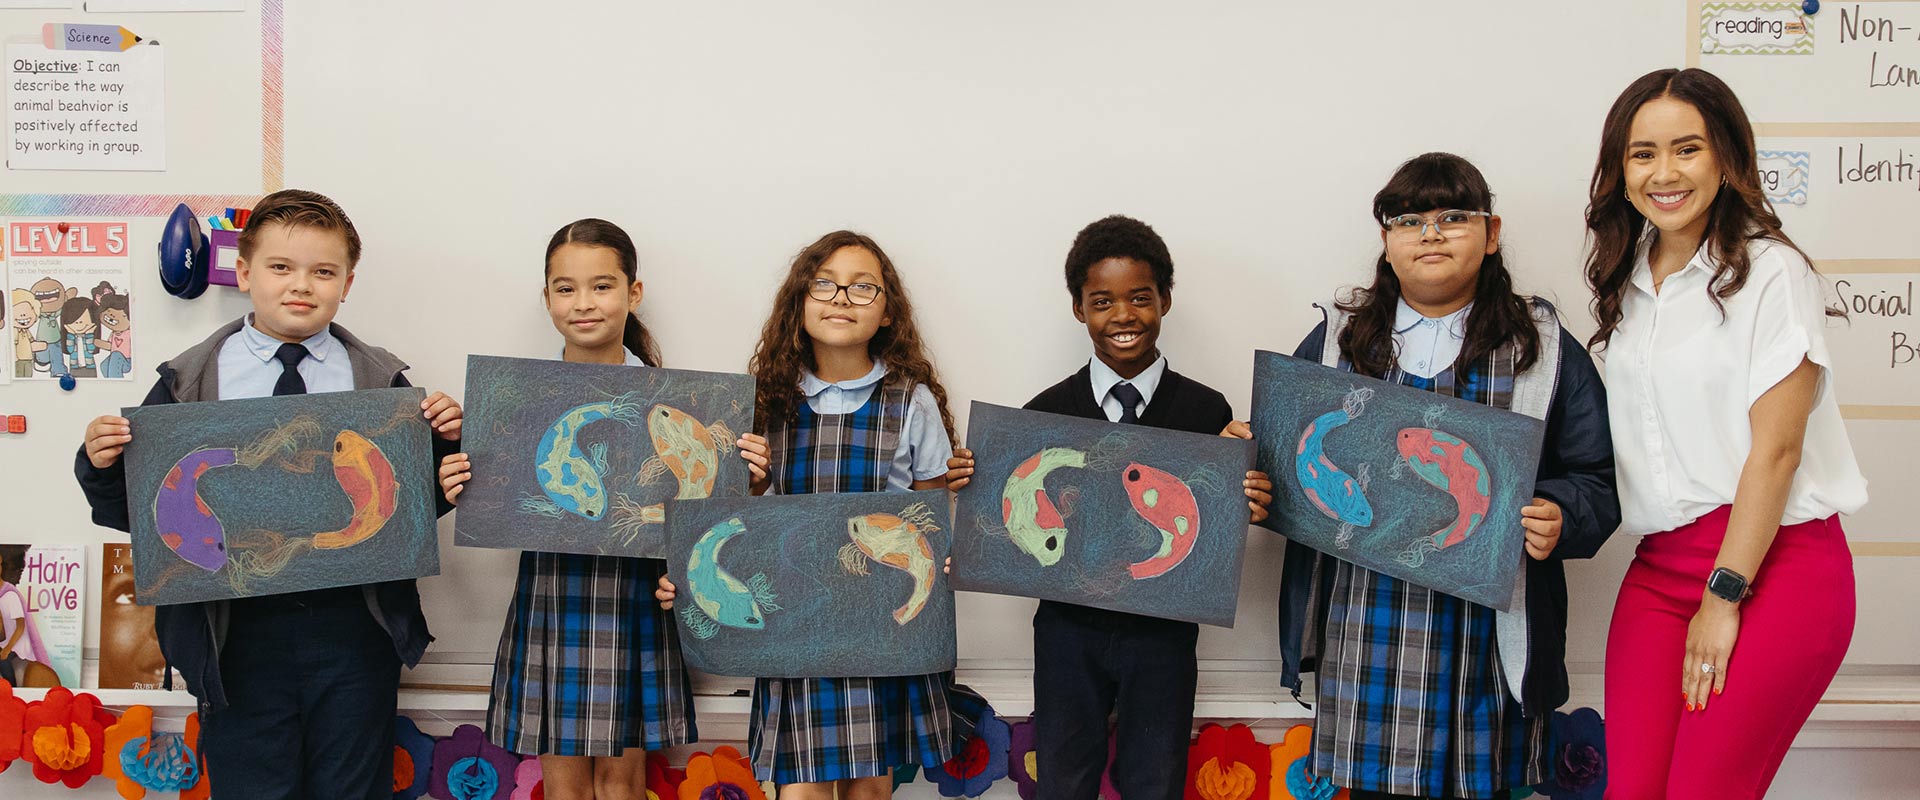 St. Raphael students showing their artwork